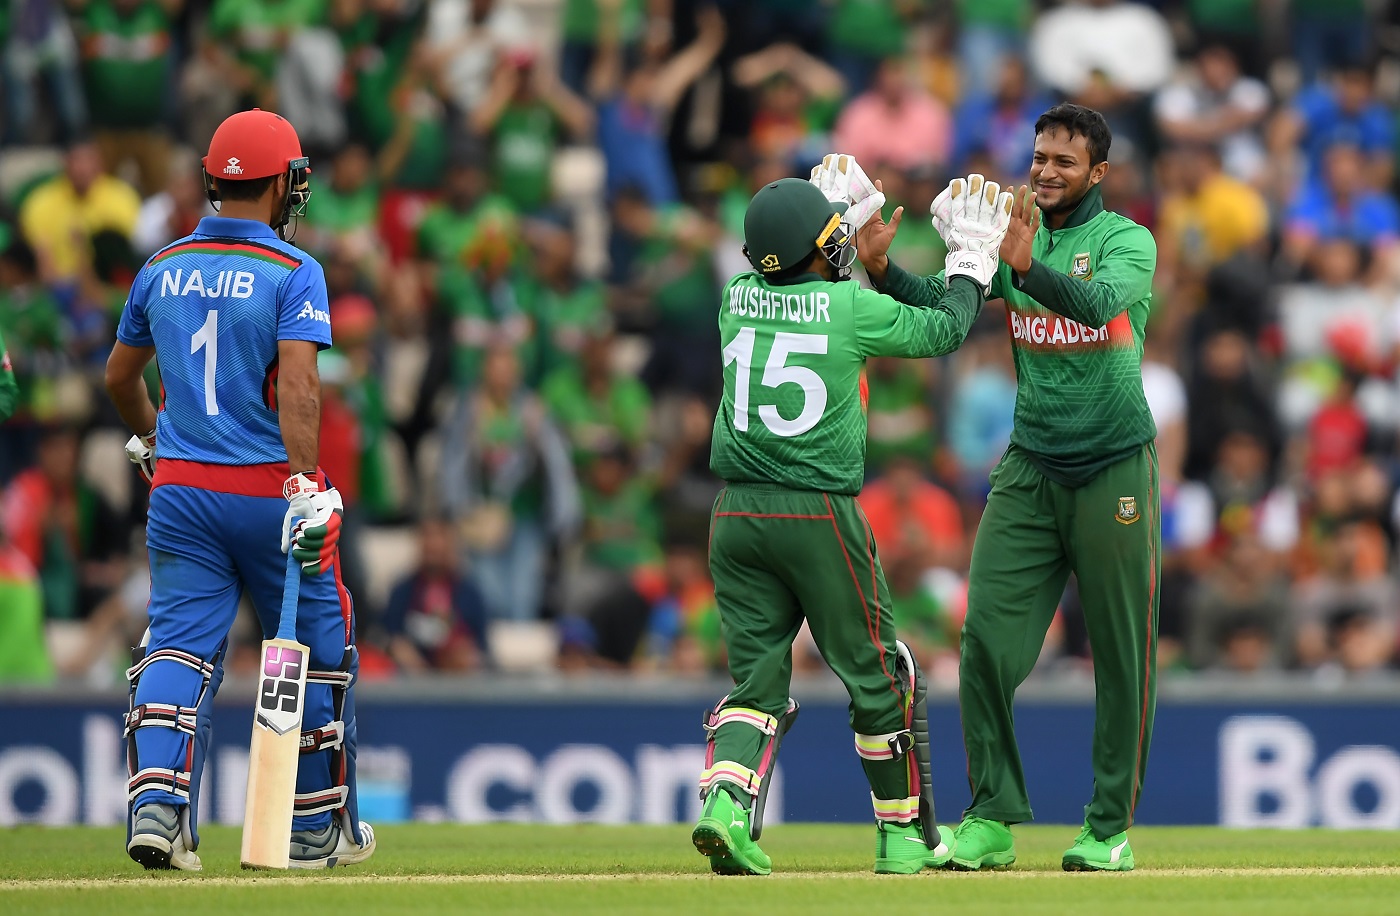 BAN vs AFG Live Streaming Details- When And Where To Watch Bangladesh vs Afghanistan Live In Your Country? Asia Cup 2022, Match 3